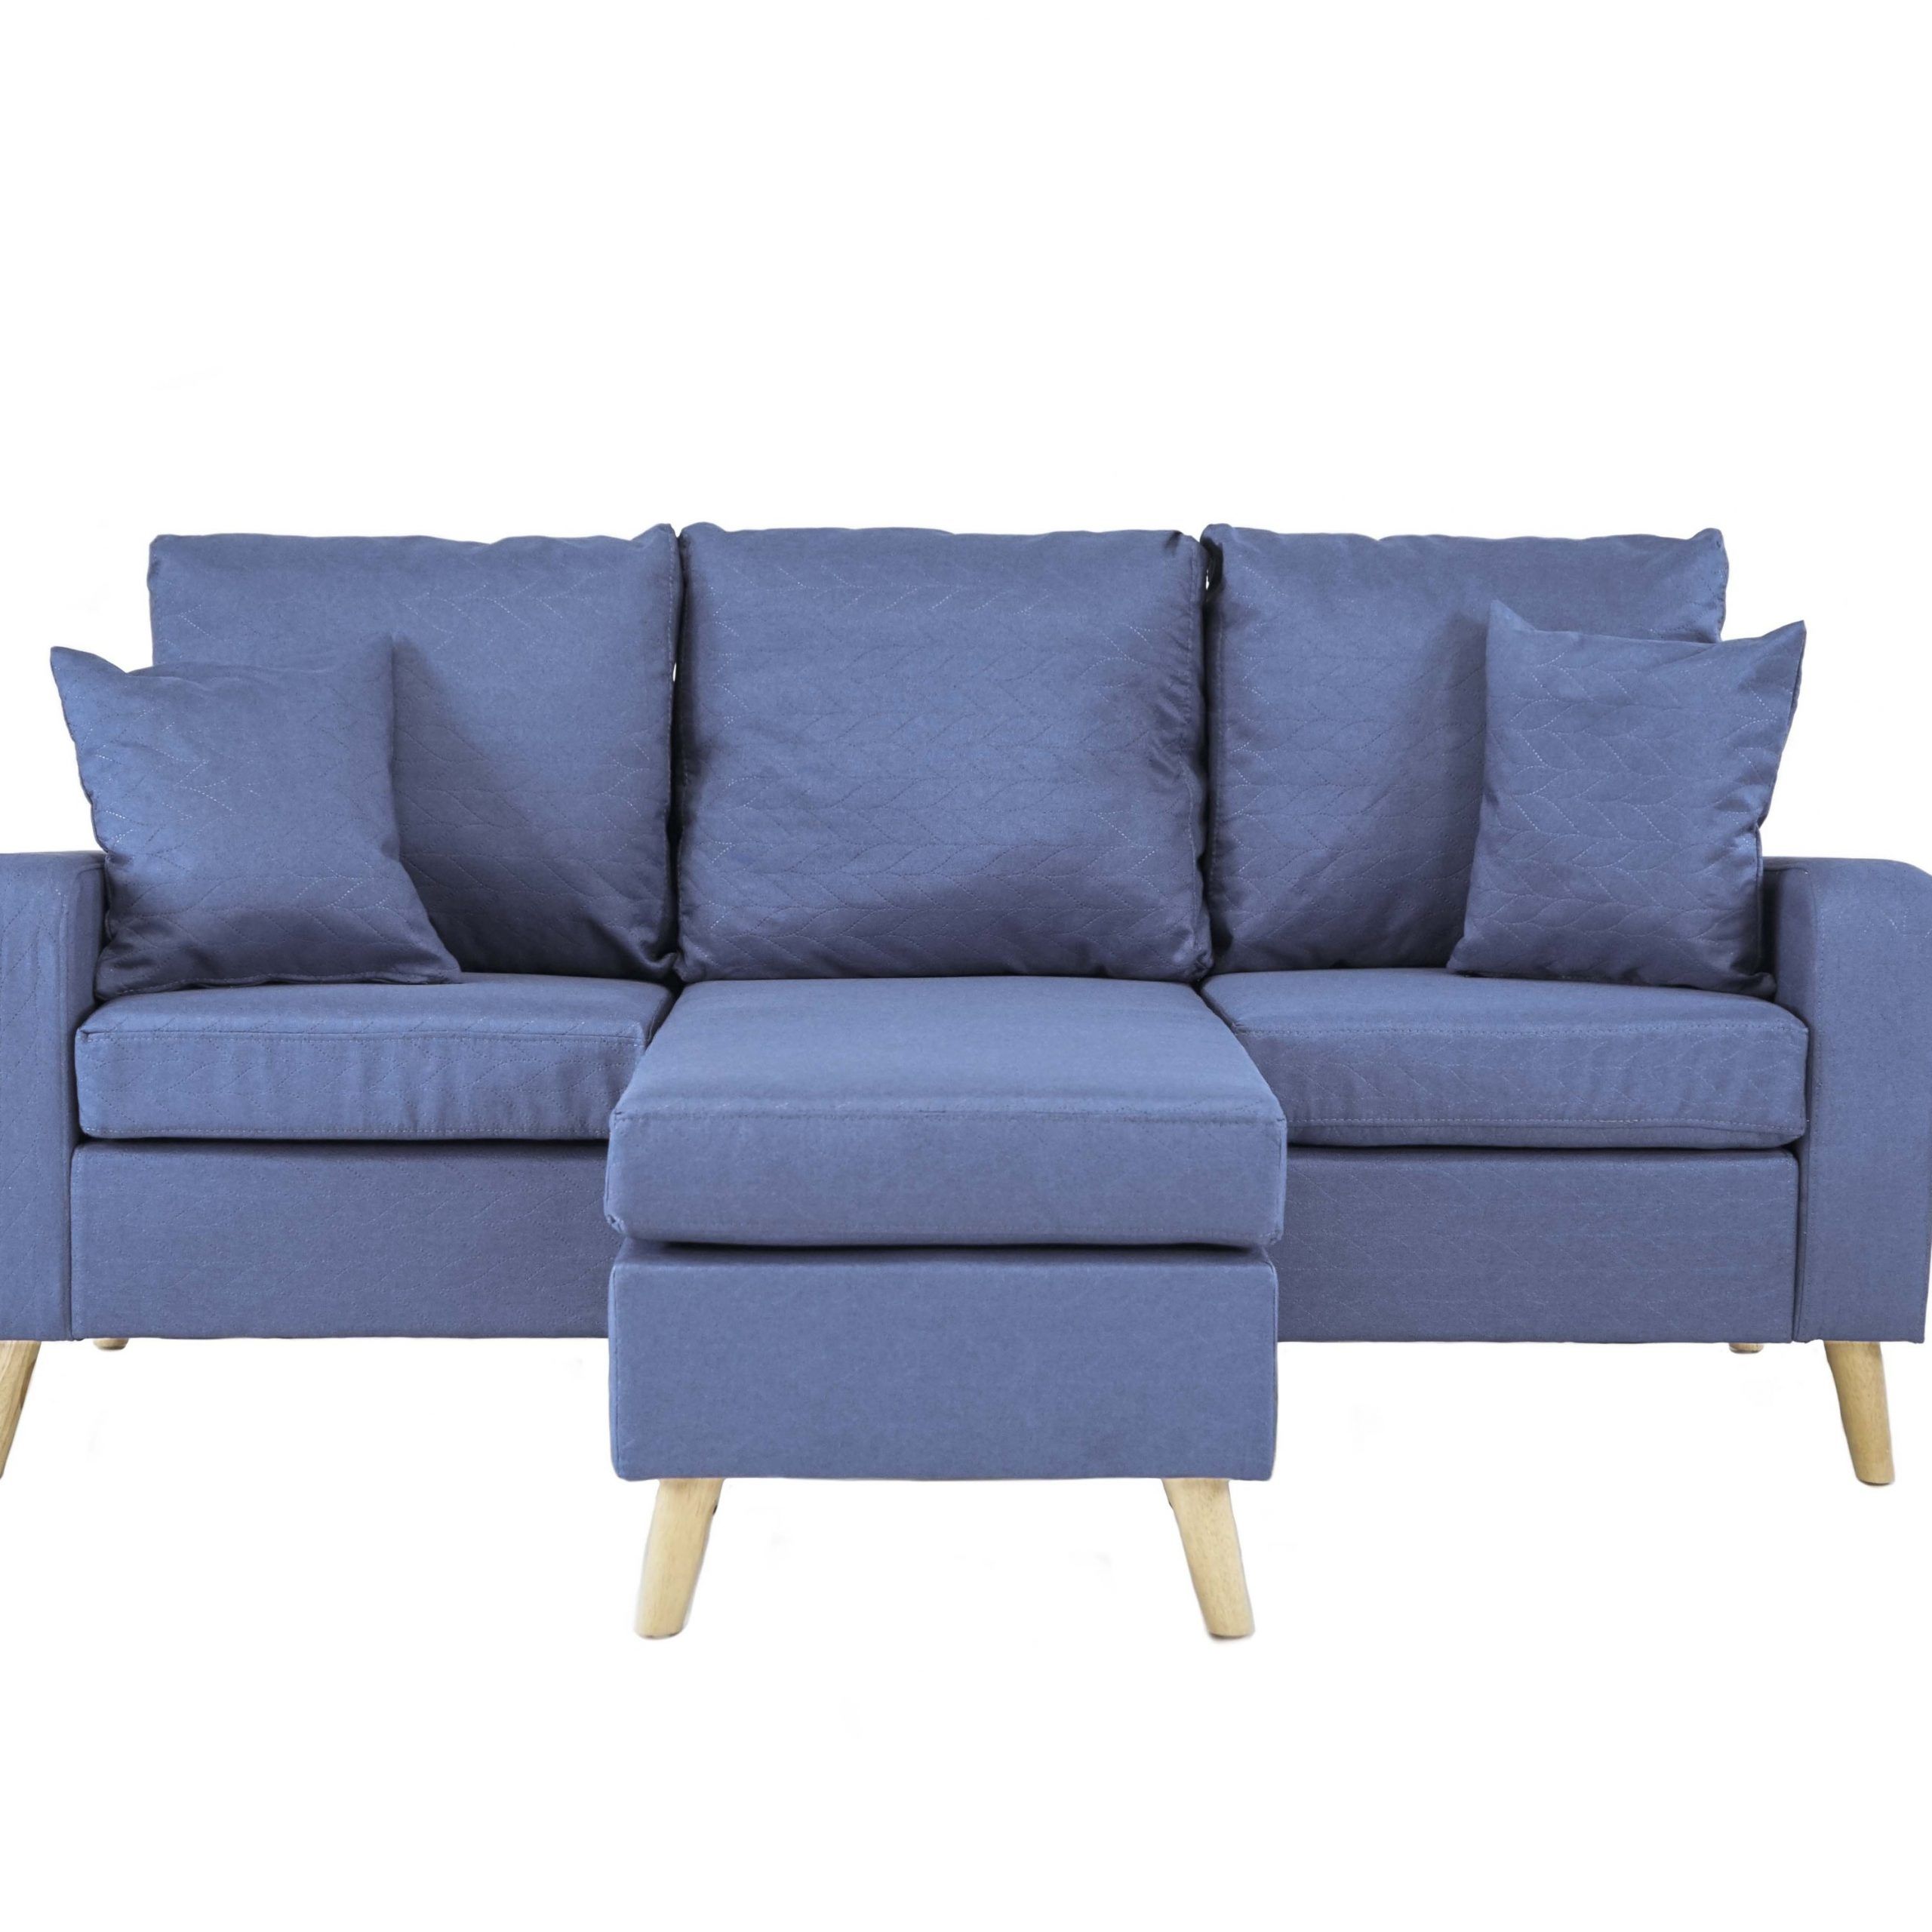 Light Blue Small Space Furniture Sectional Sofa With With Regard To Dulce Mid Century Chaise Sofas Dark Blue (View 7 of 15)